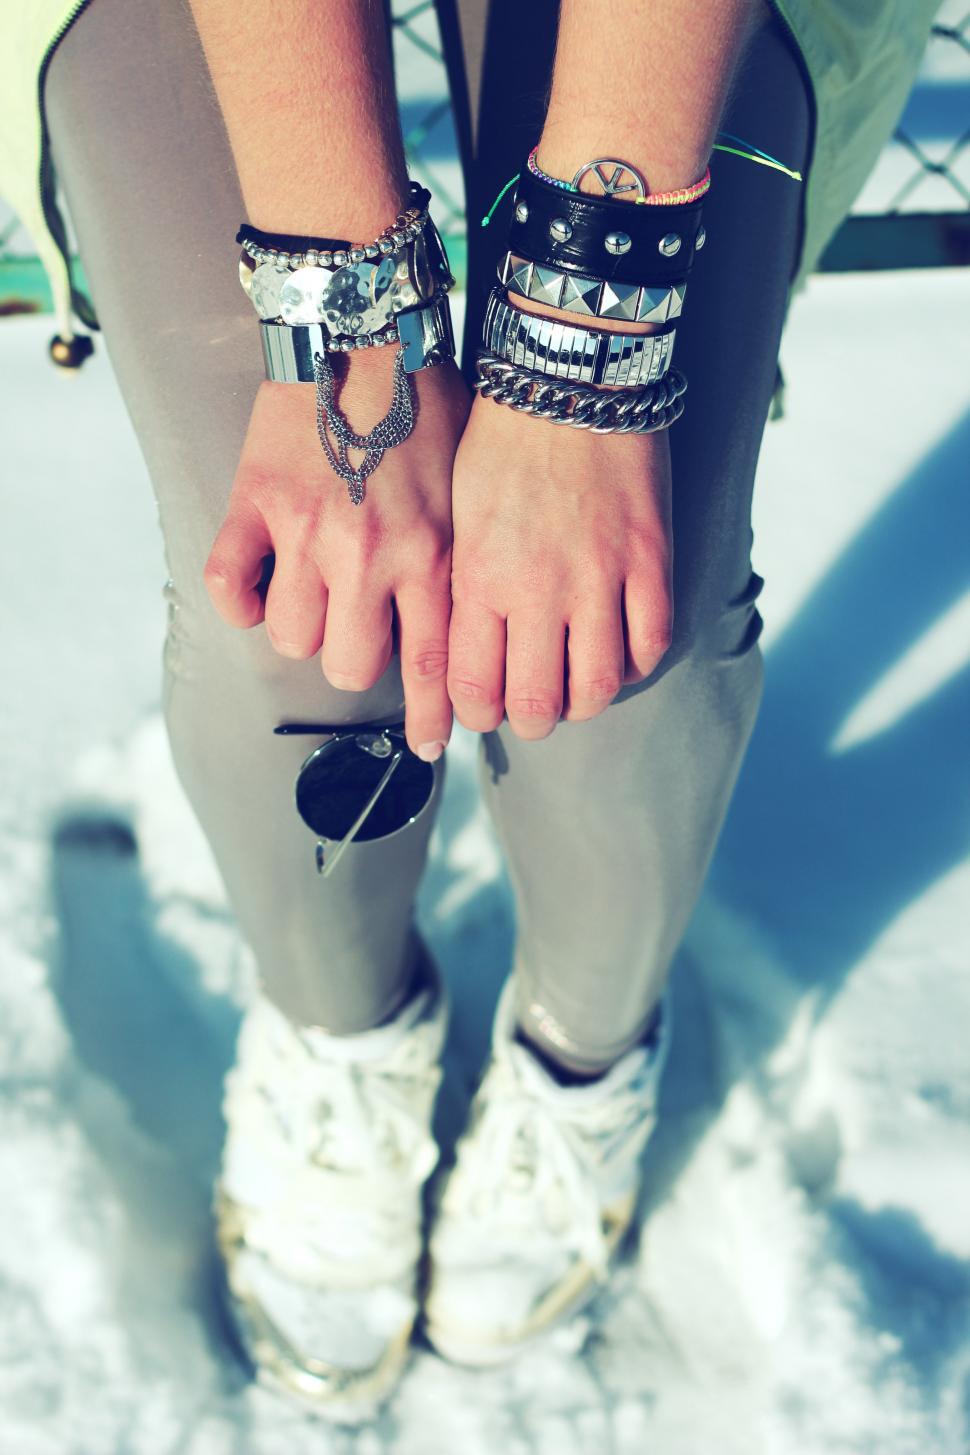 Free Image of Person Wearing Skis and Bracelets 